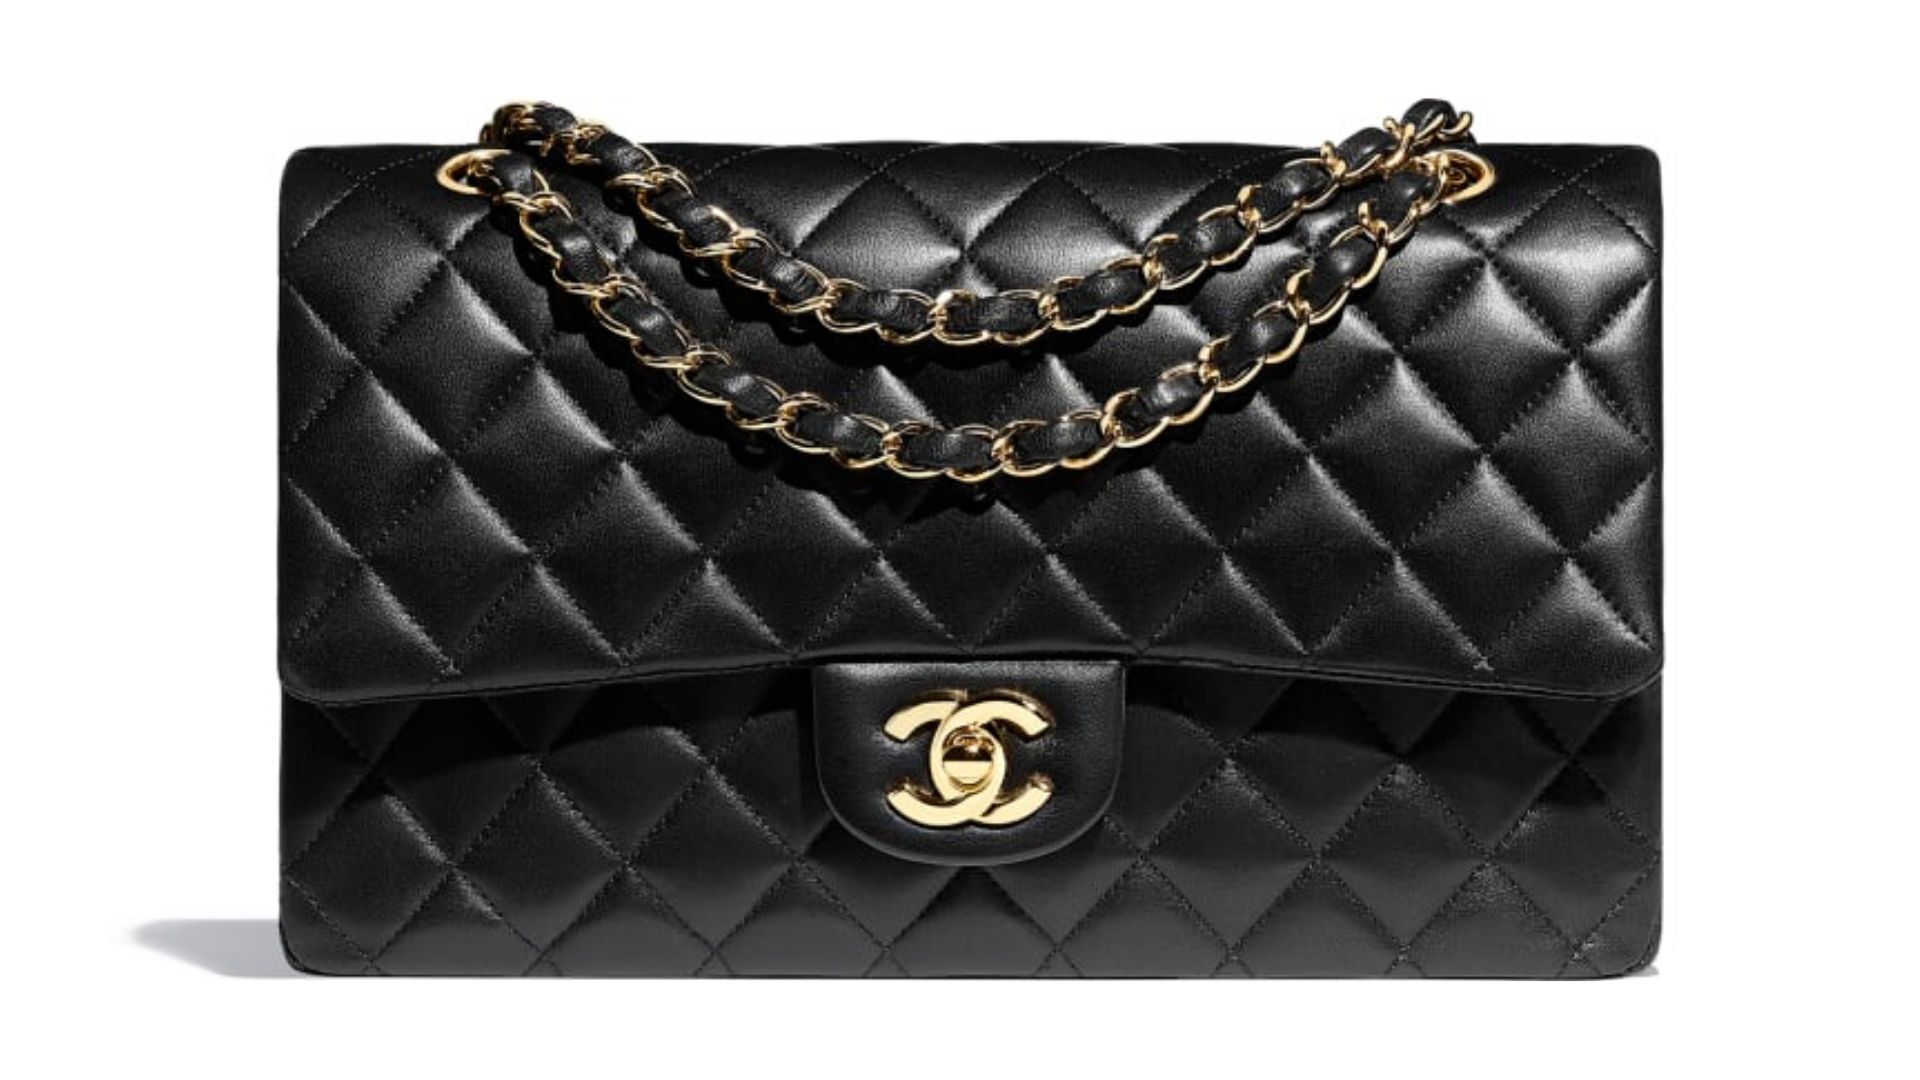 What is the most expensive Chanel Bag?